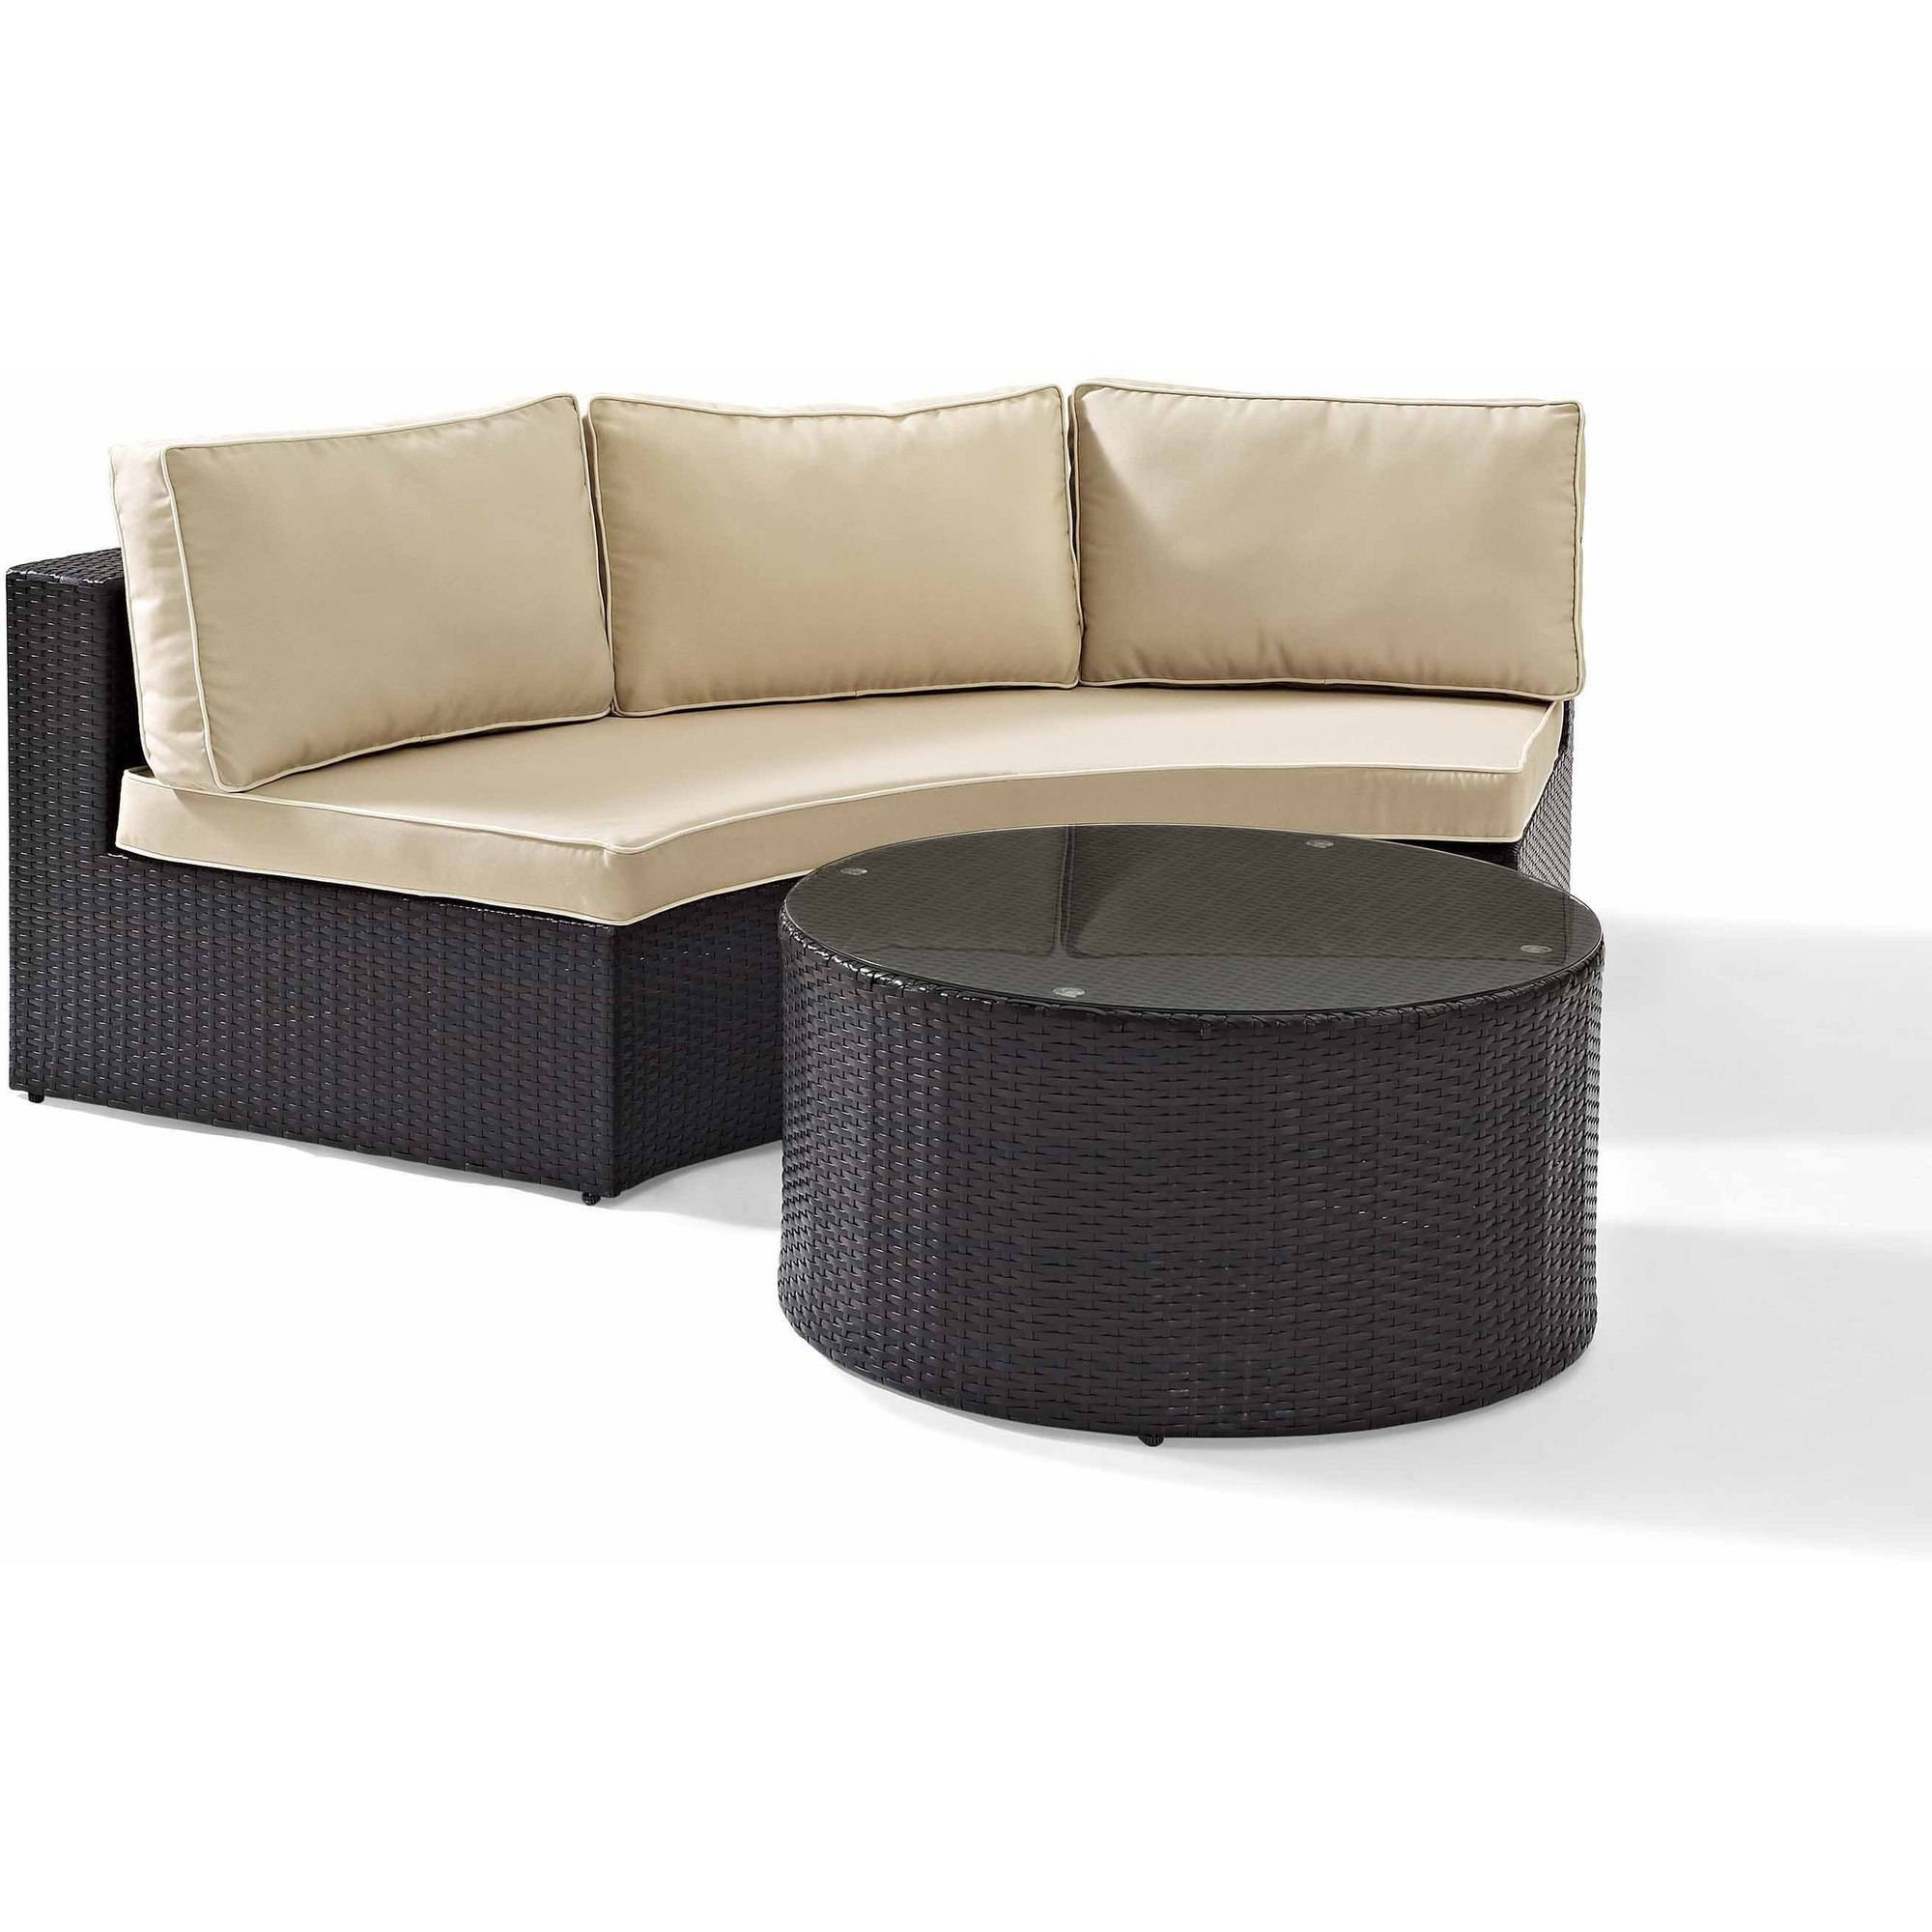 Crosley Furniture Catalina 2 Piece Outdoor Wicker Seating Set With Sand Cushions Round Sectional Sofa With Round Glass Top Coffee Table Walmart intended for dimensions 2000 X 2000